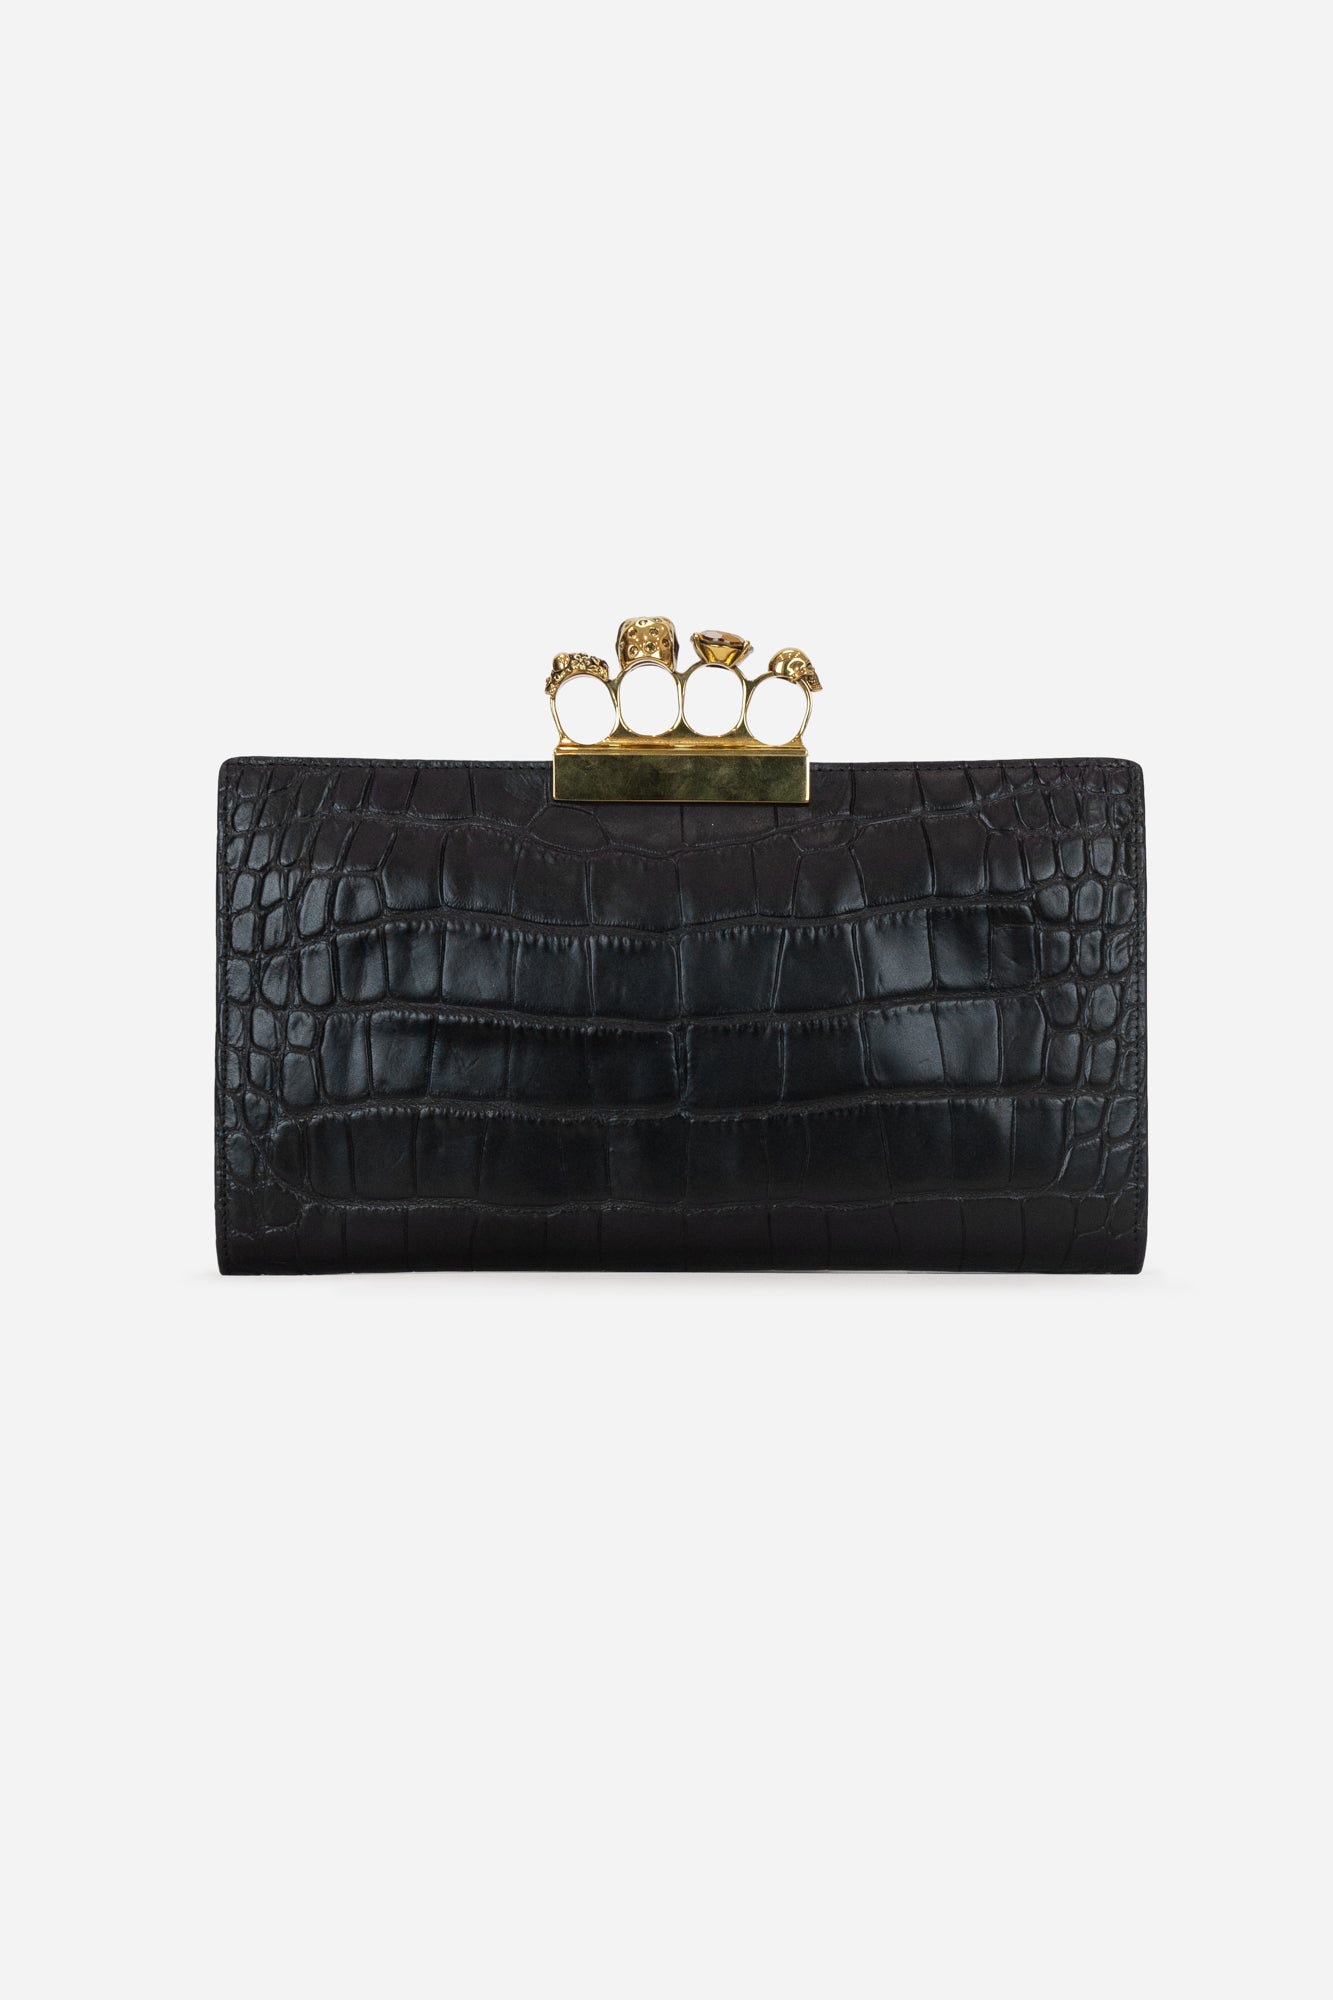 Black Aligator Clutch With Gold Nuckle Jems